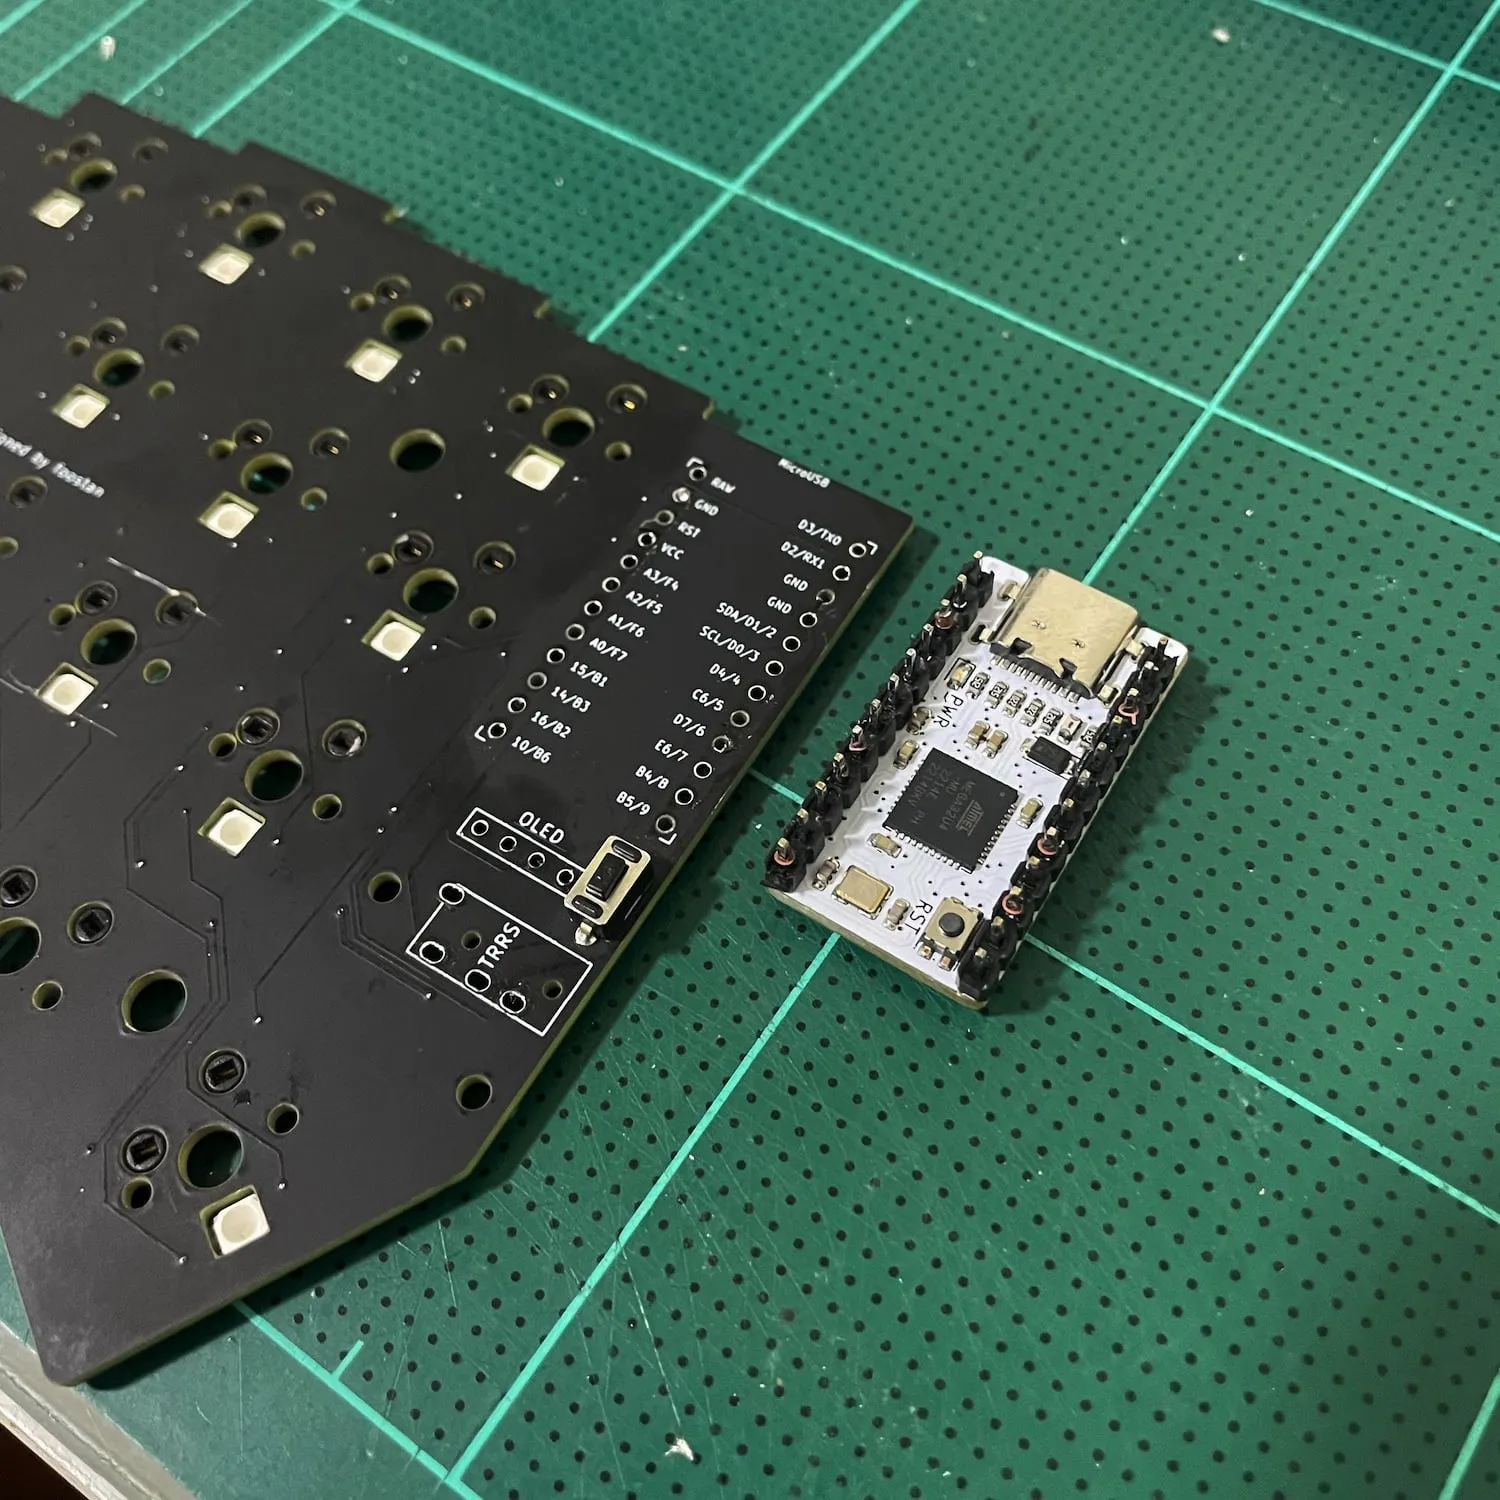 Sea-micro controller is removed from the board.